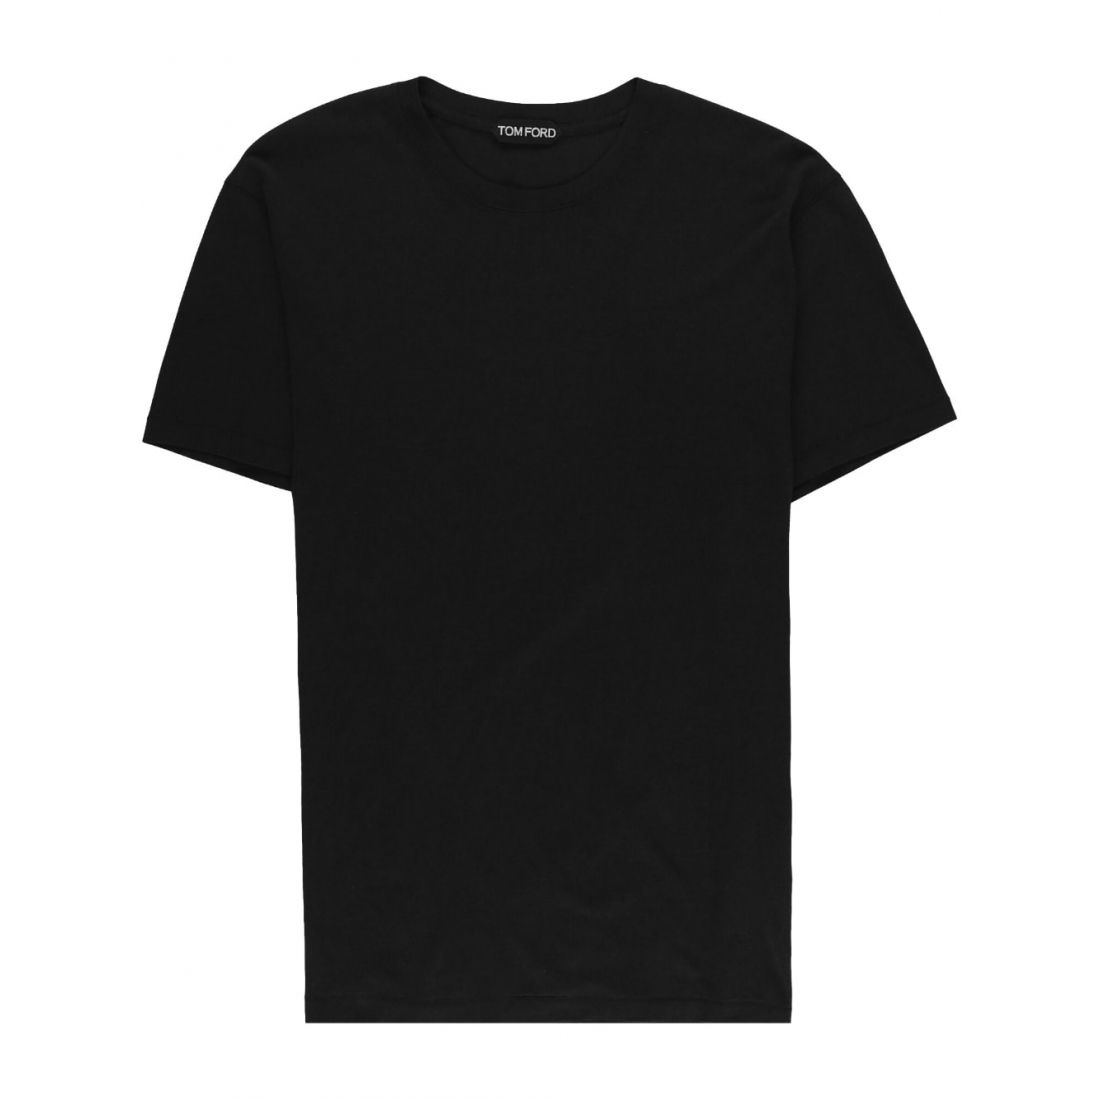 Tom Ford - T-shirt pour Hommes